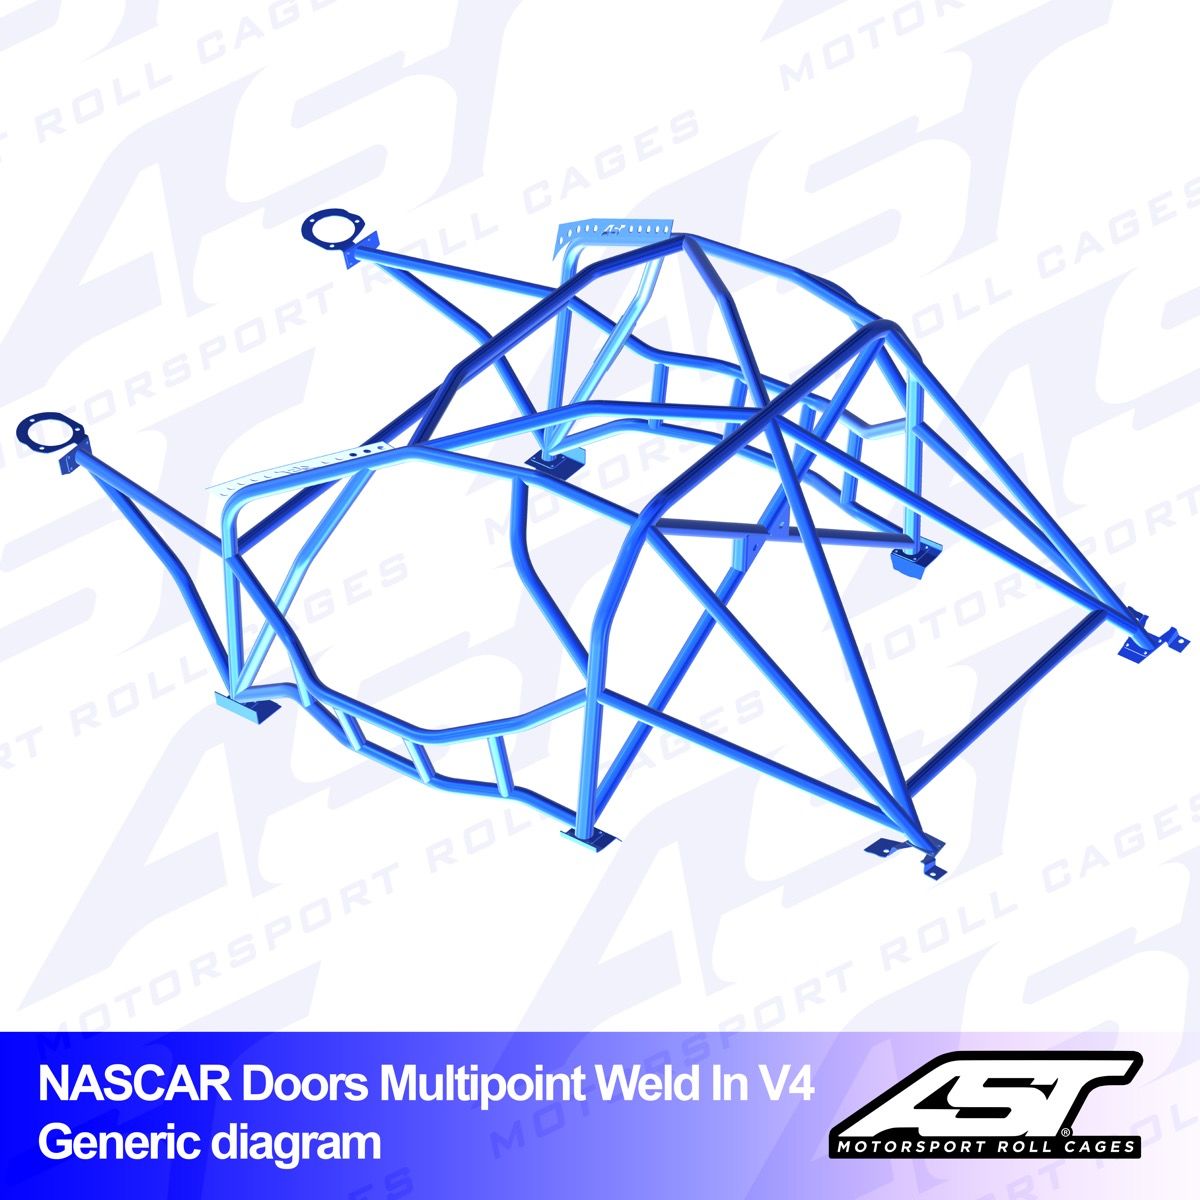 Roll Cage BMW (F82) 4-Series 2-door Coupe RWD MULTIPOINT WELD IN V4 NASCAR-door for drift